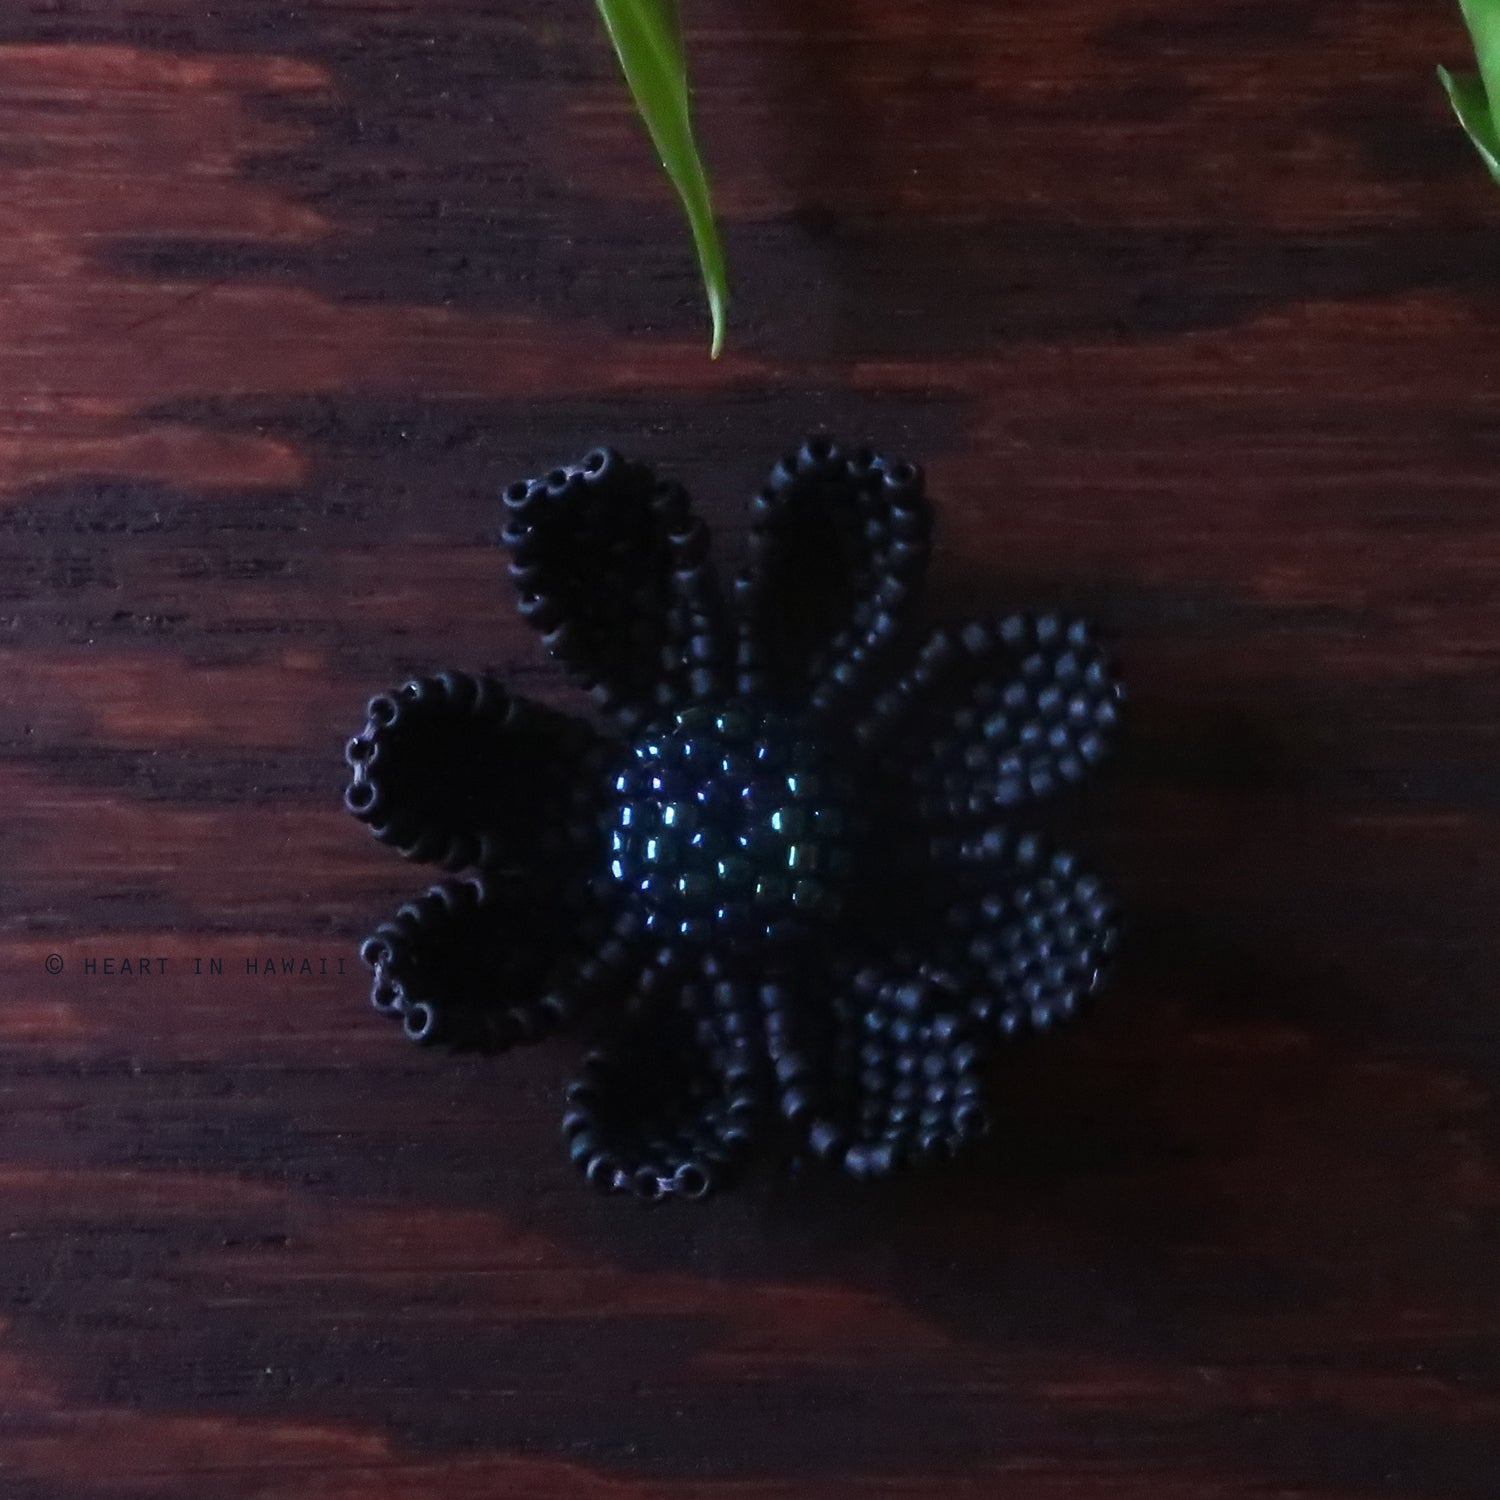 Heart in Hawaii Beaded Cosmos Flower Brooch - Matte Black and Galactic Blue